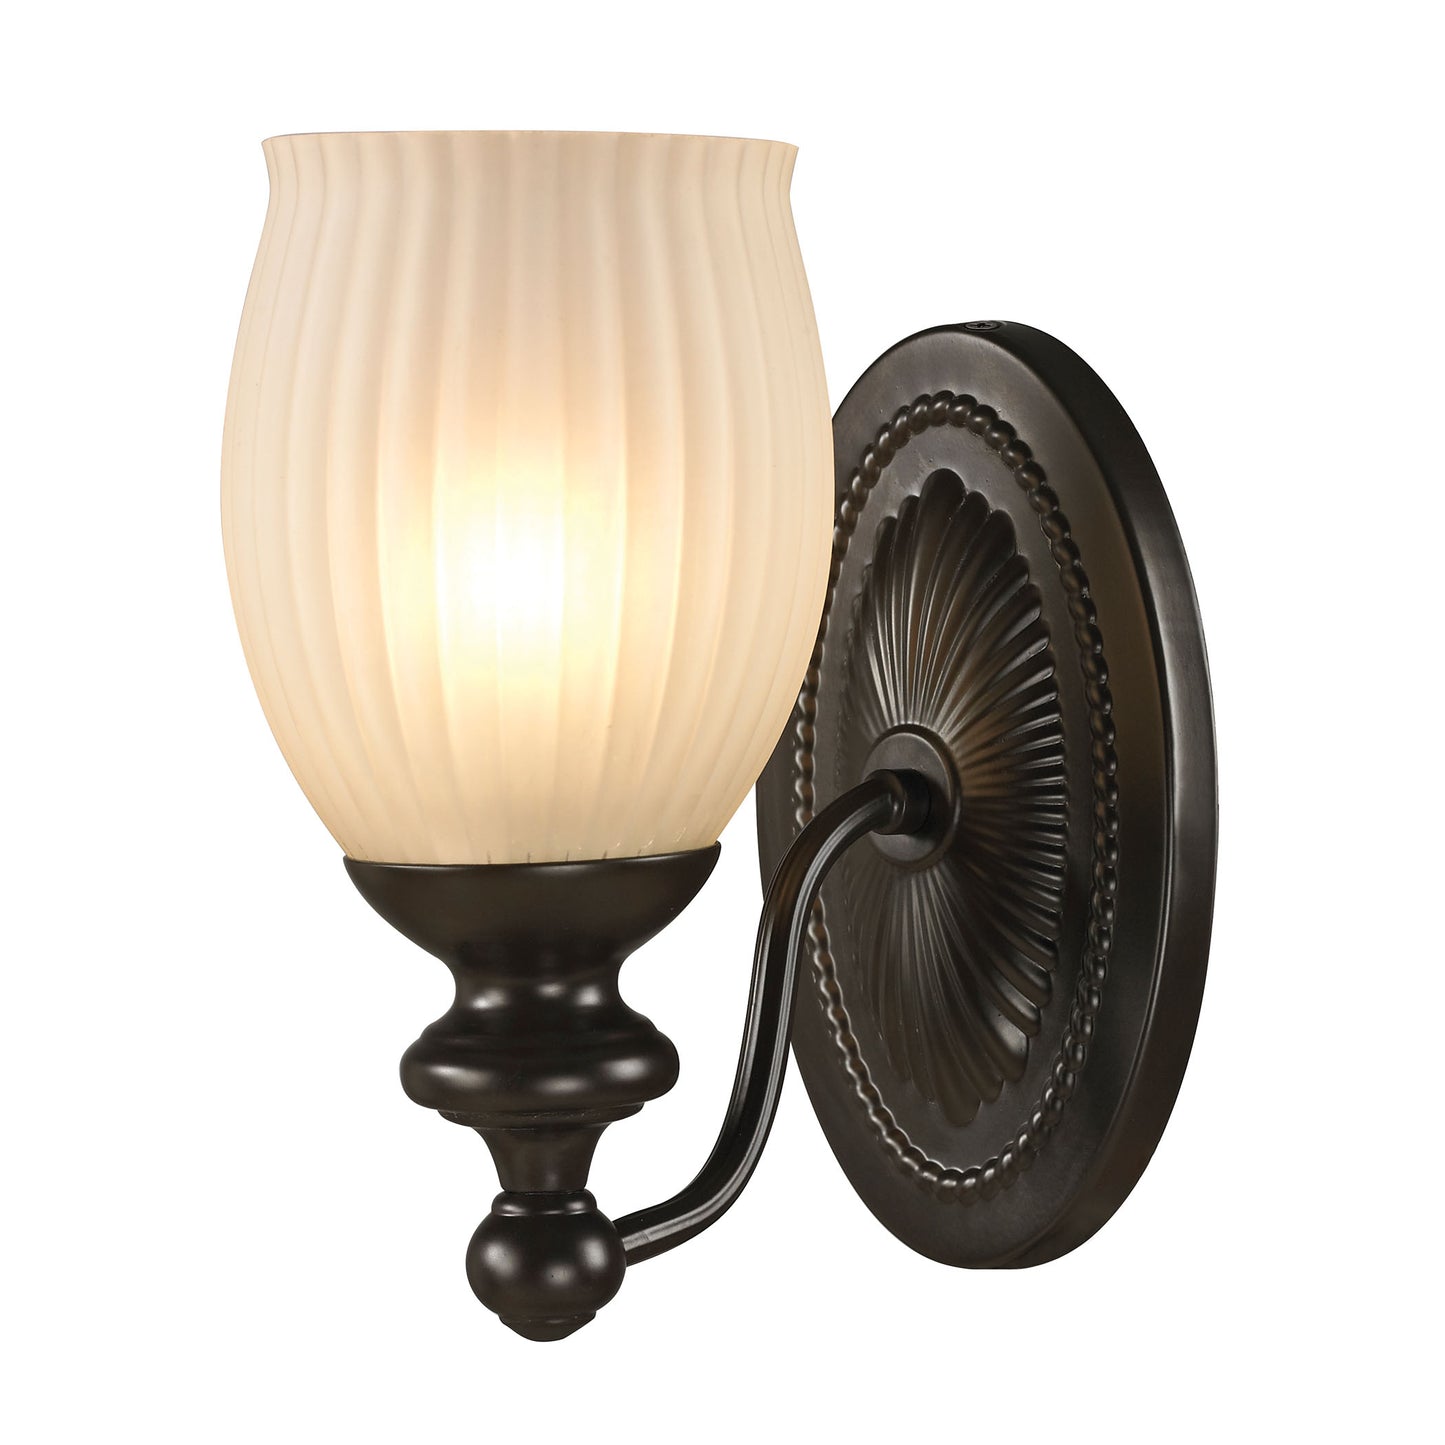 Park Ridge 1-Light Vanity Lamp in Oil Rubbed Bronze with Reeded Glass